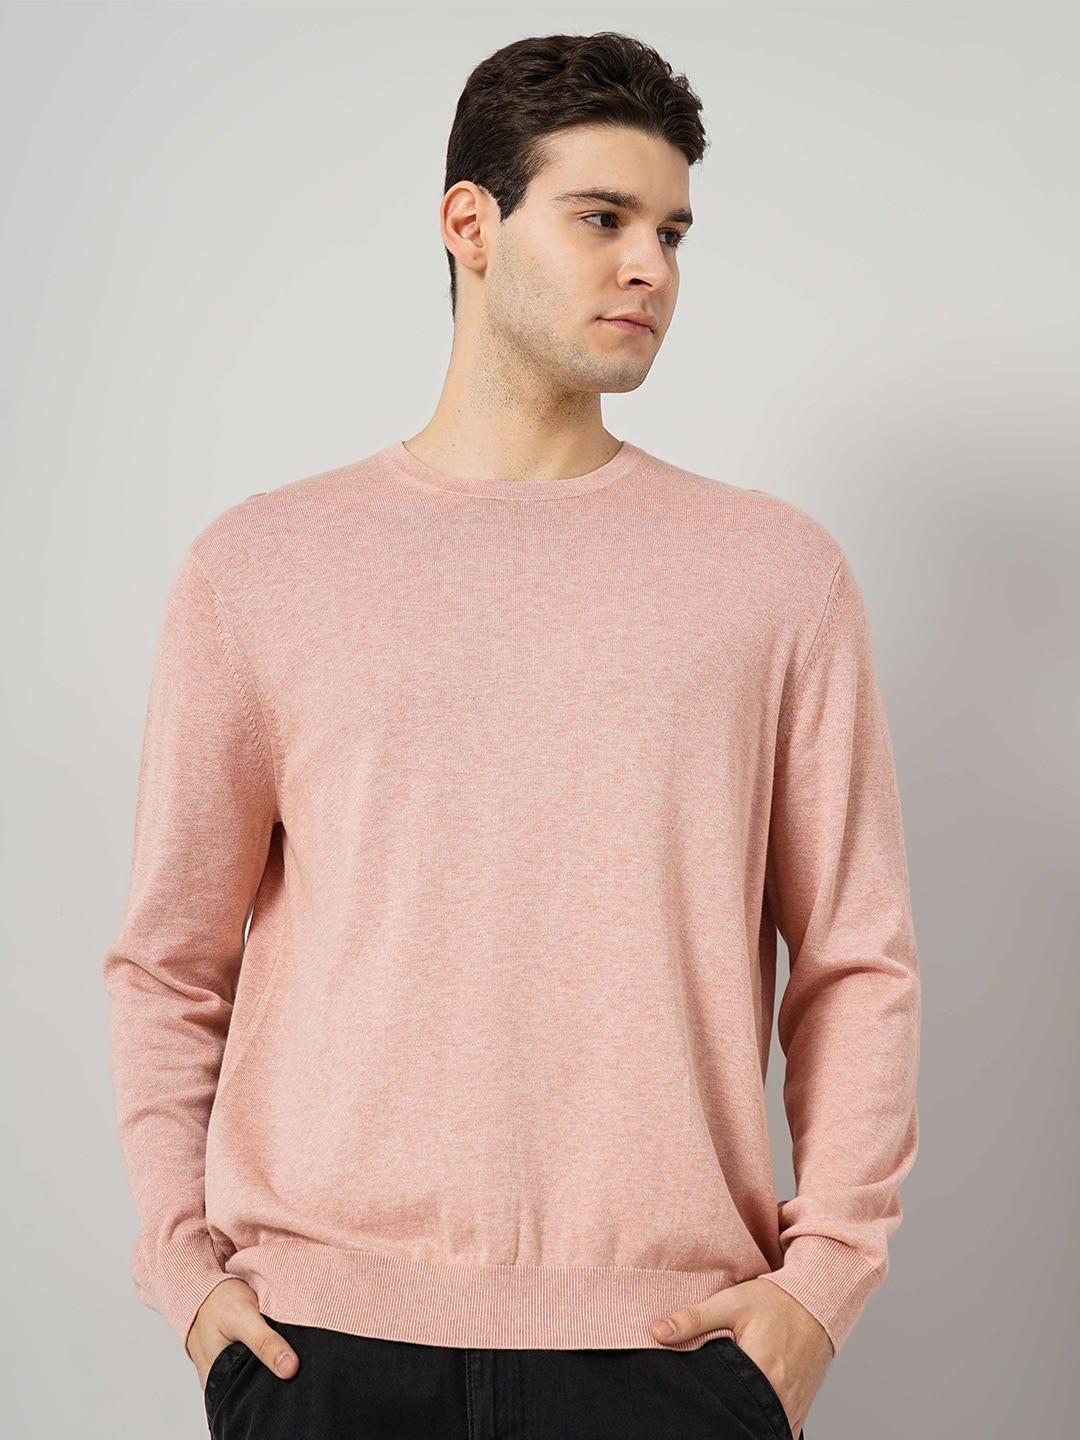 celio-round-neck-long-sleeves-cotton-pullover-sweater